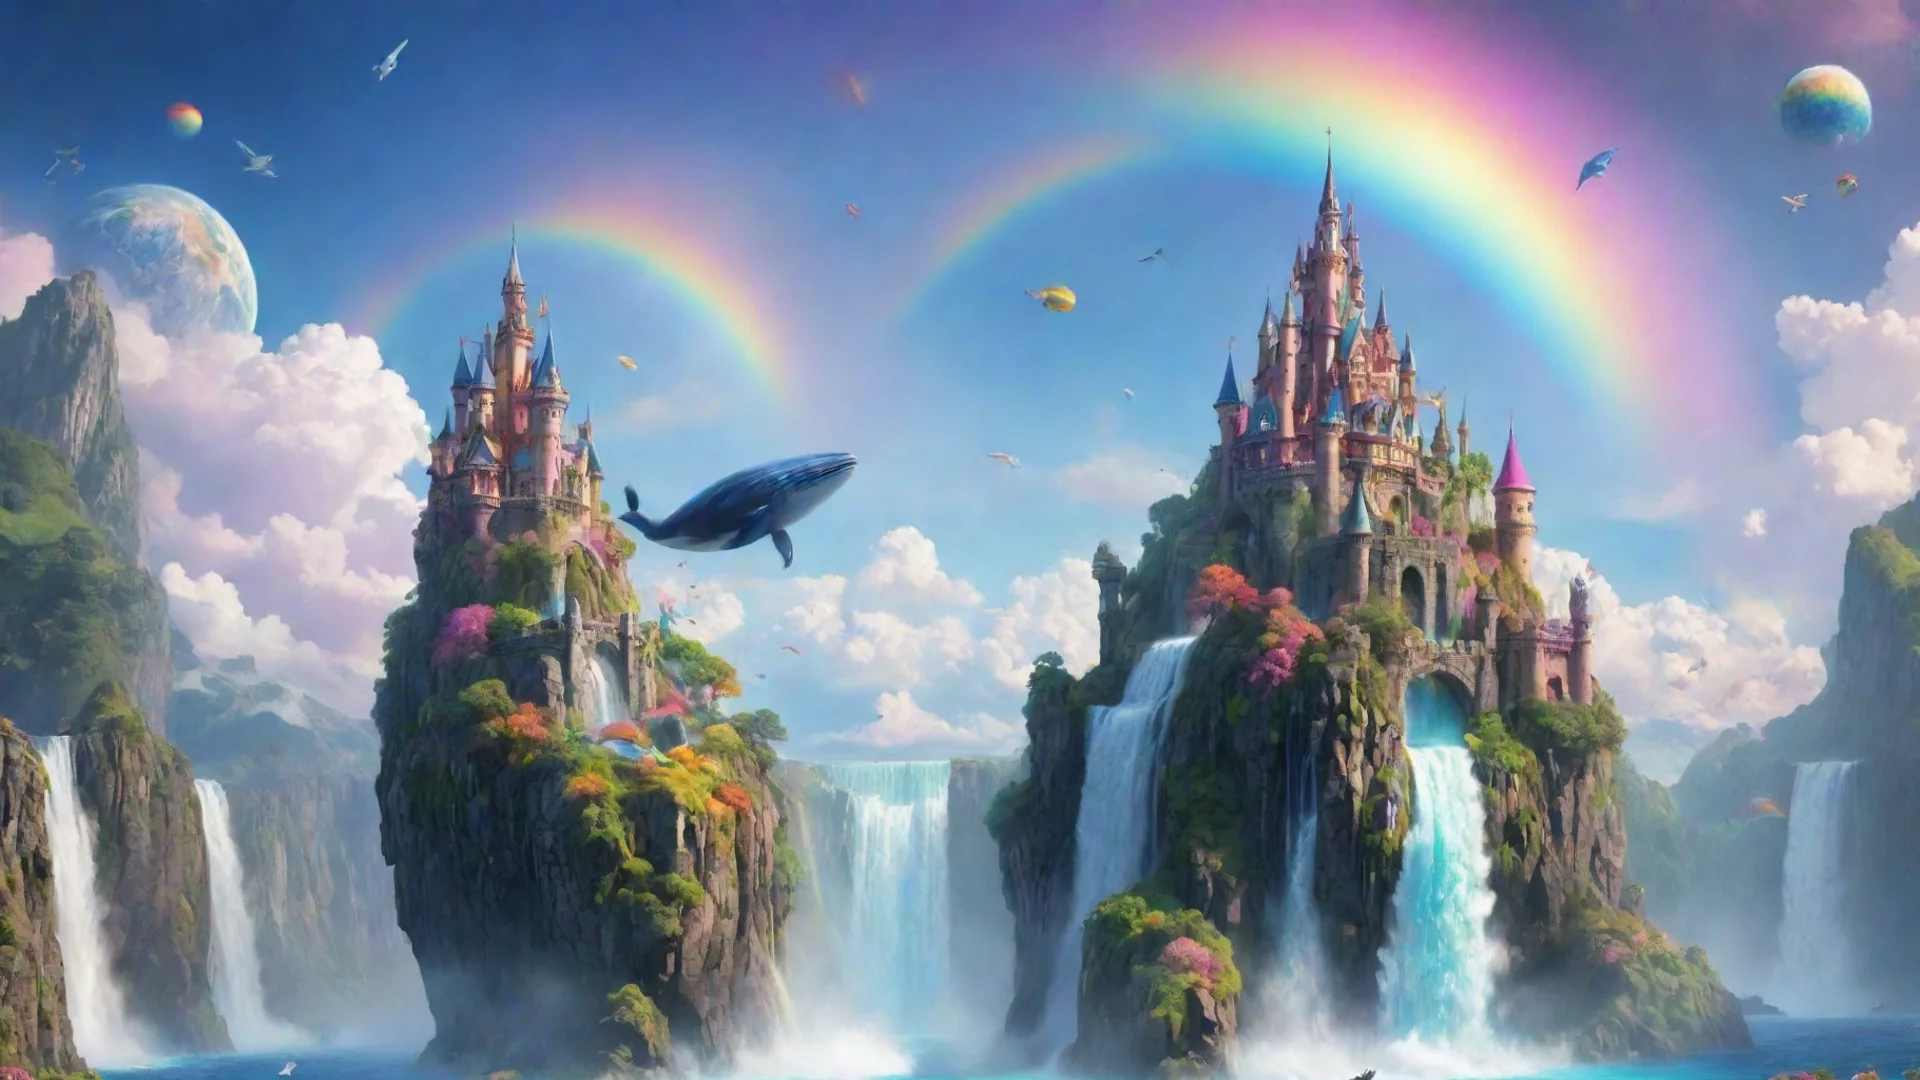 aimagical world flying whale castle in skky planets waterfall rainbow aesthetic omg colorful  wide